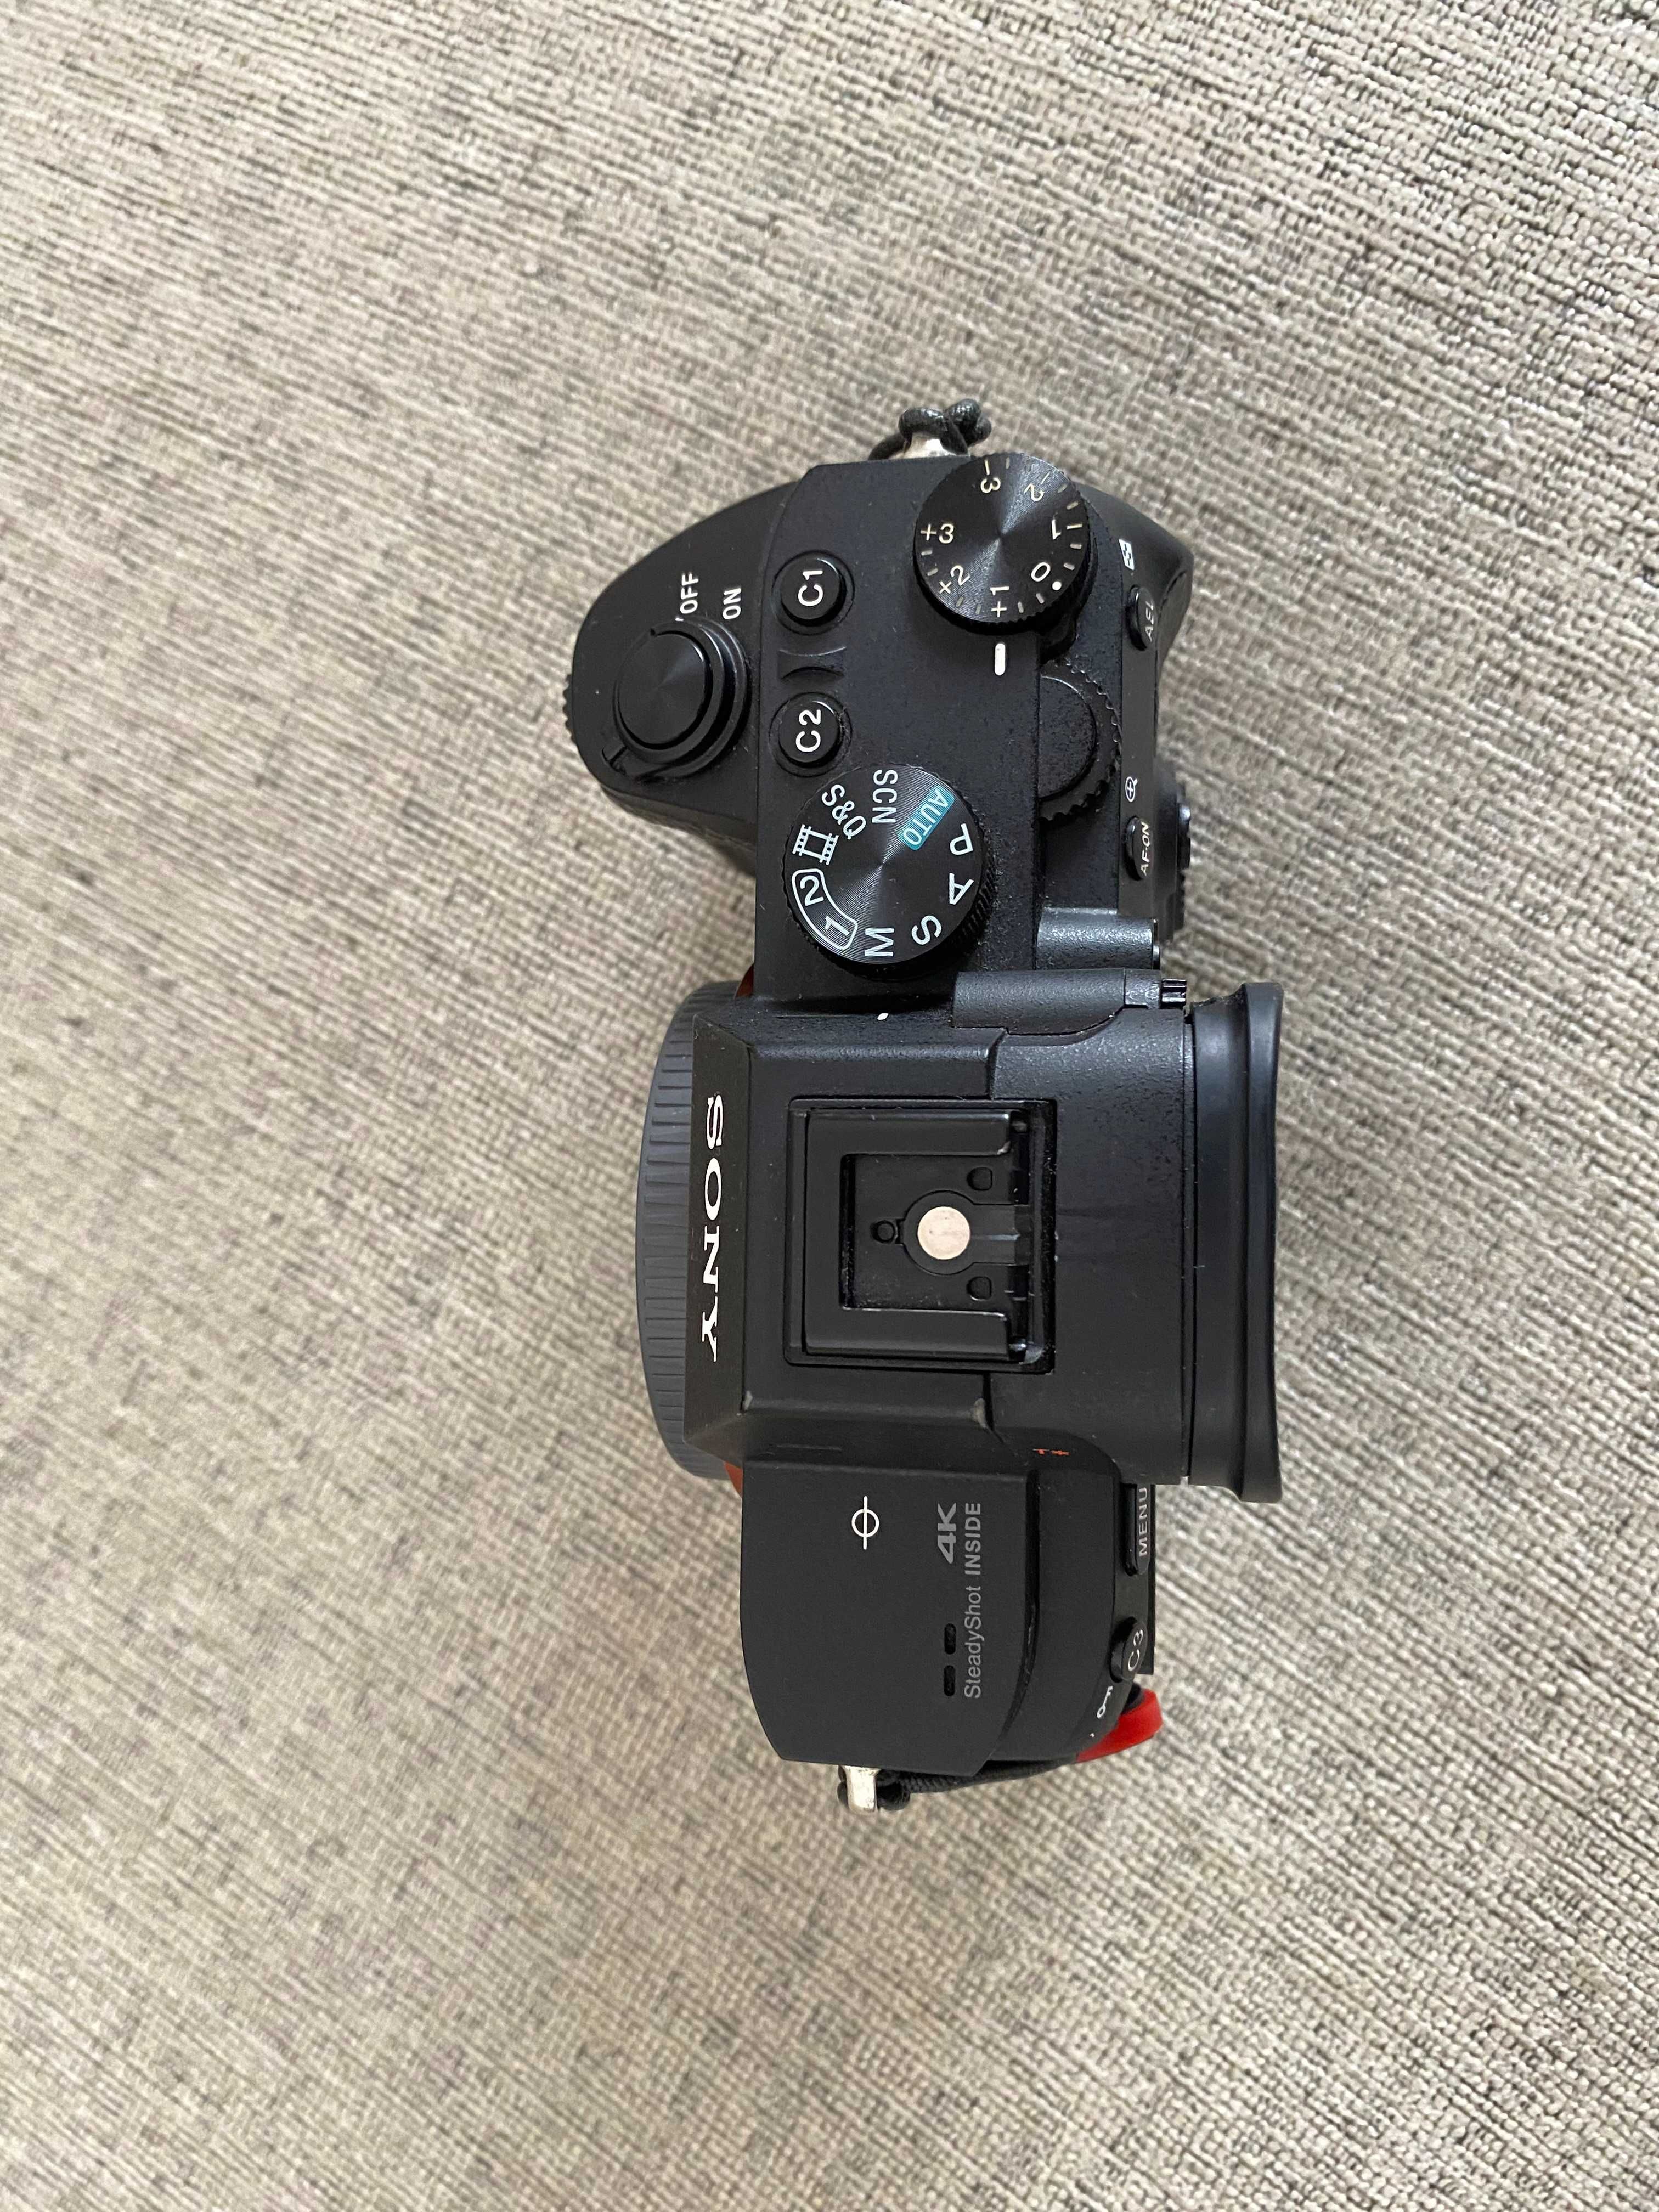 Sony A7 III + Cage SmalRing